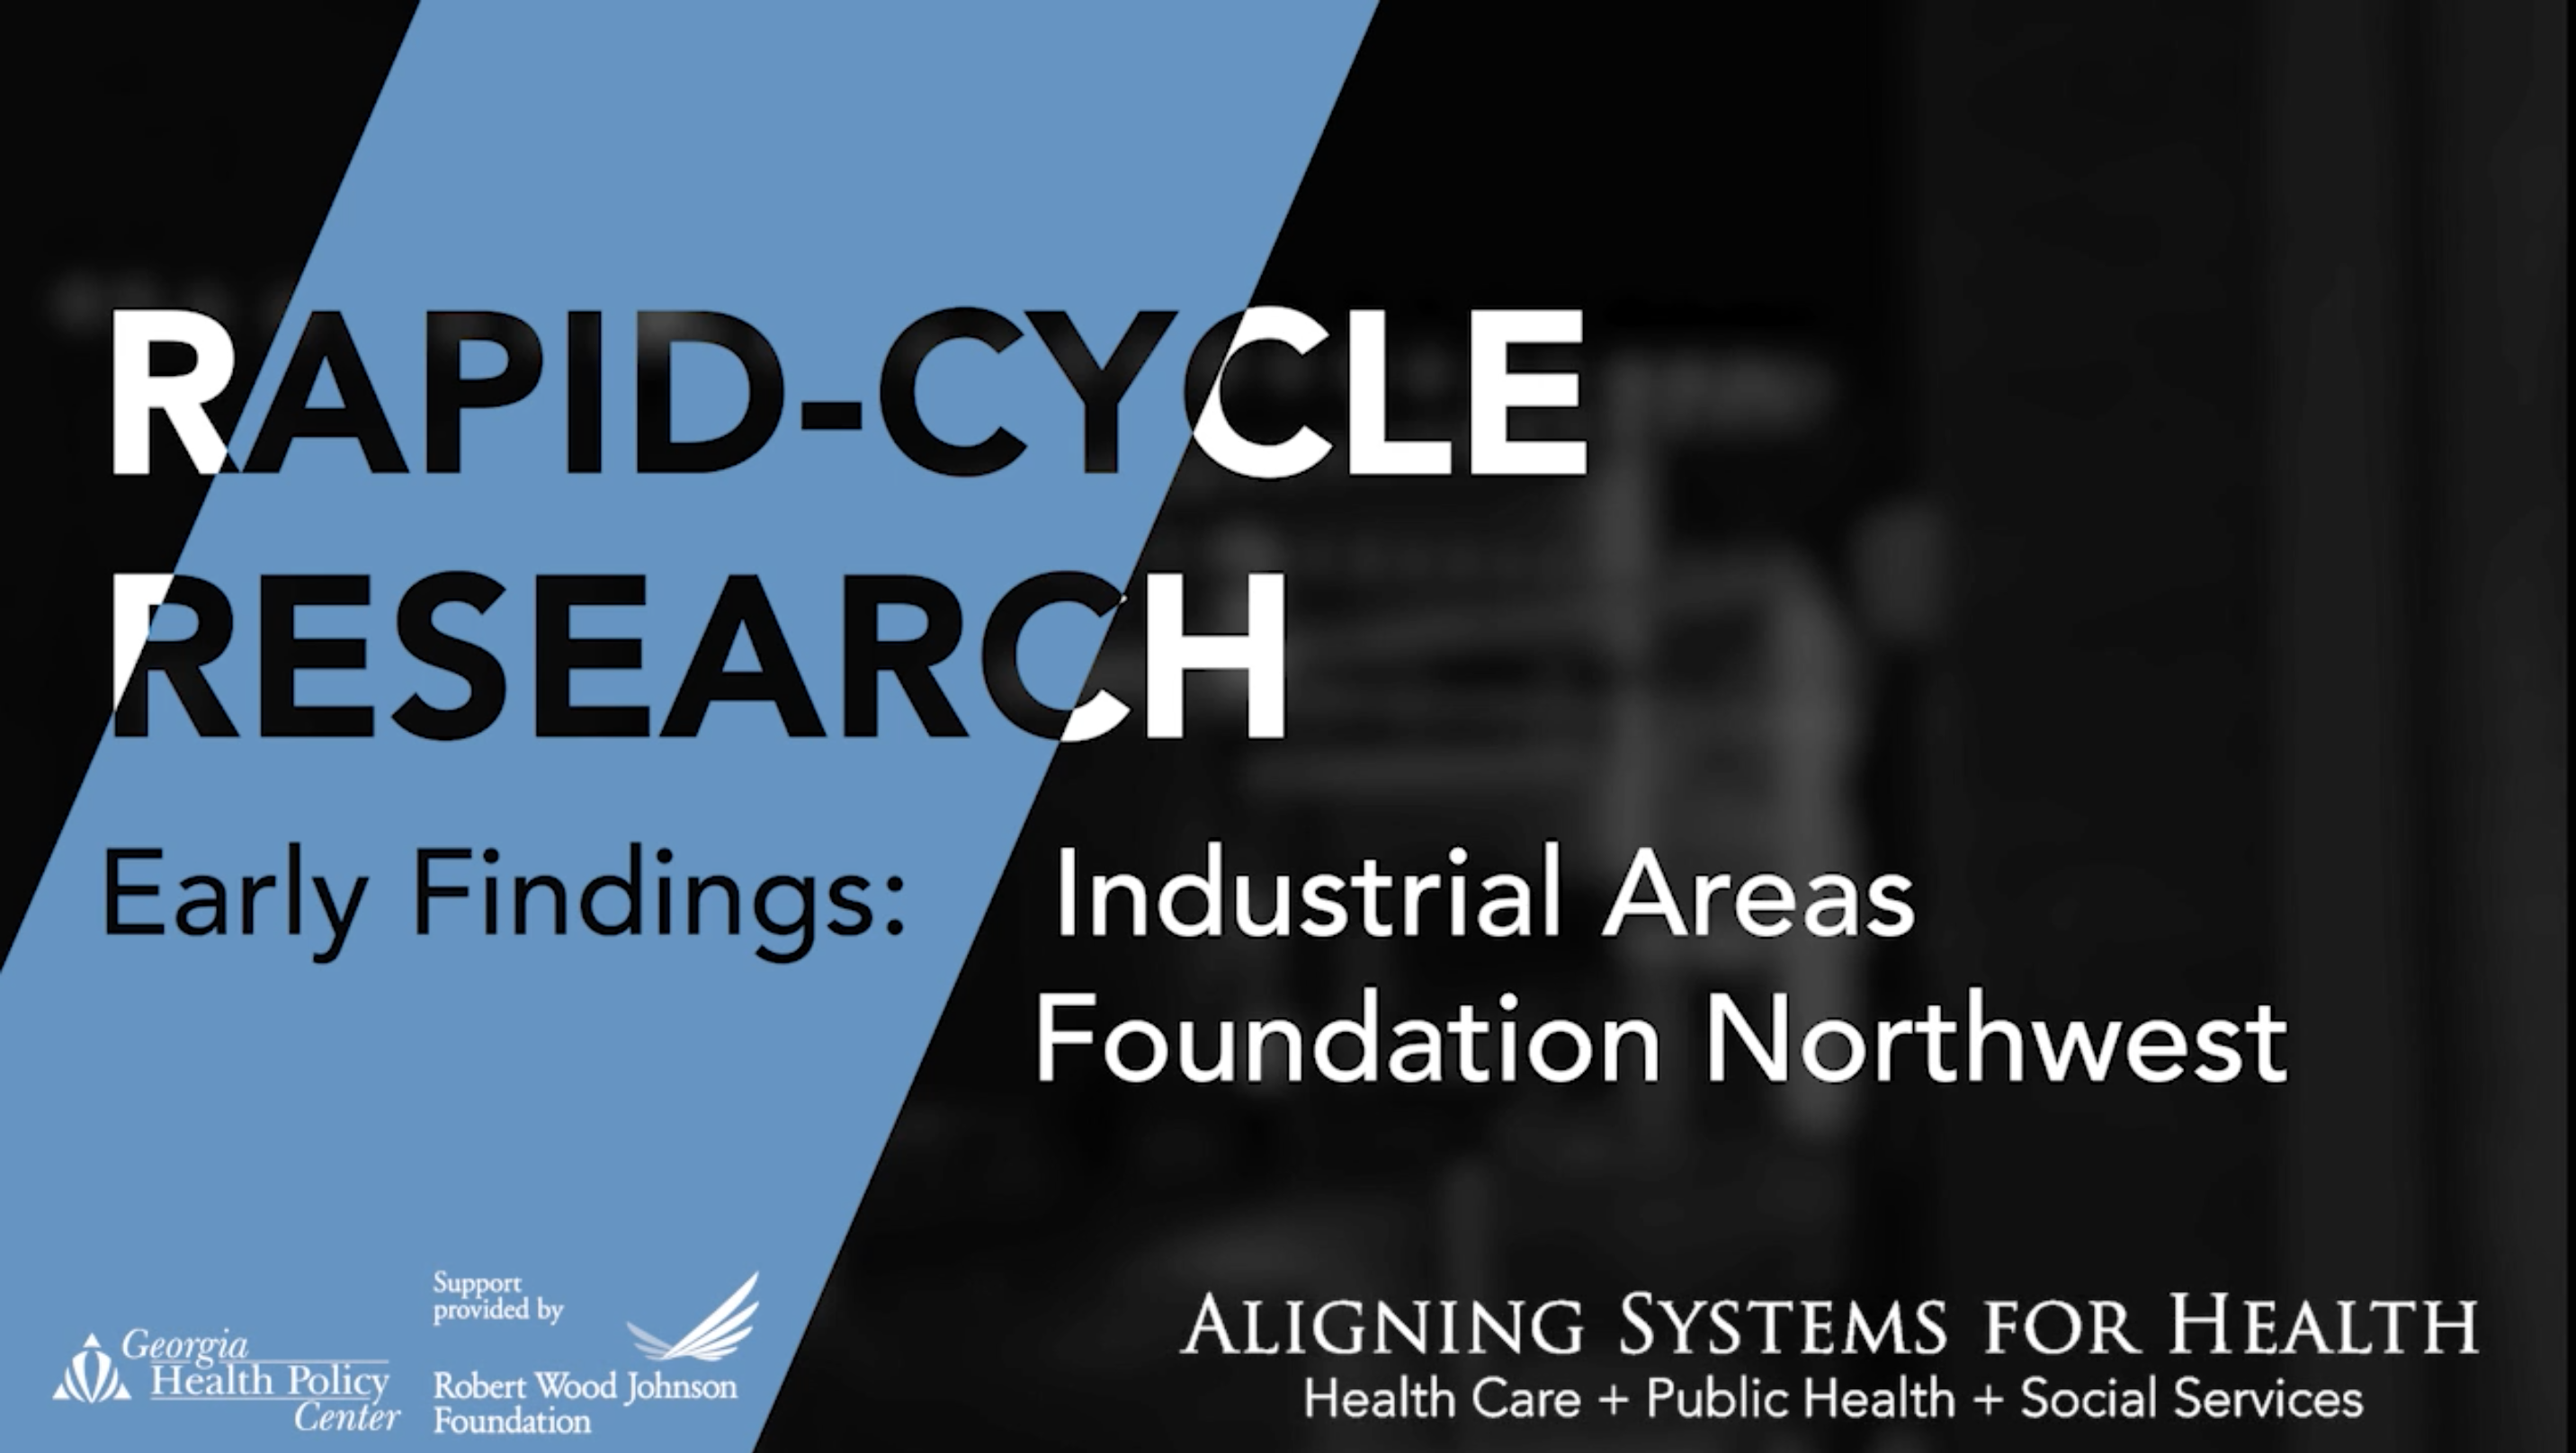 Rapid-Cycle Research Early Findings: Industrial Areas Foundation Northwest